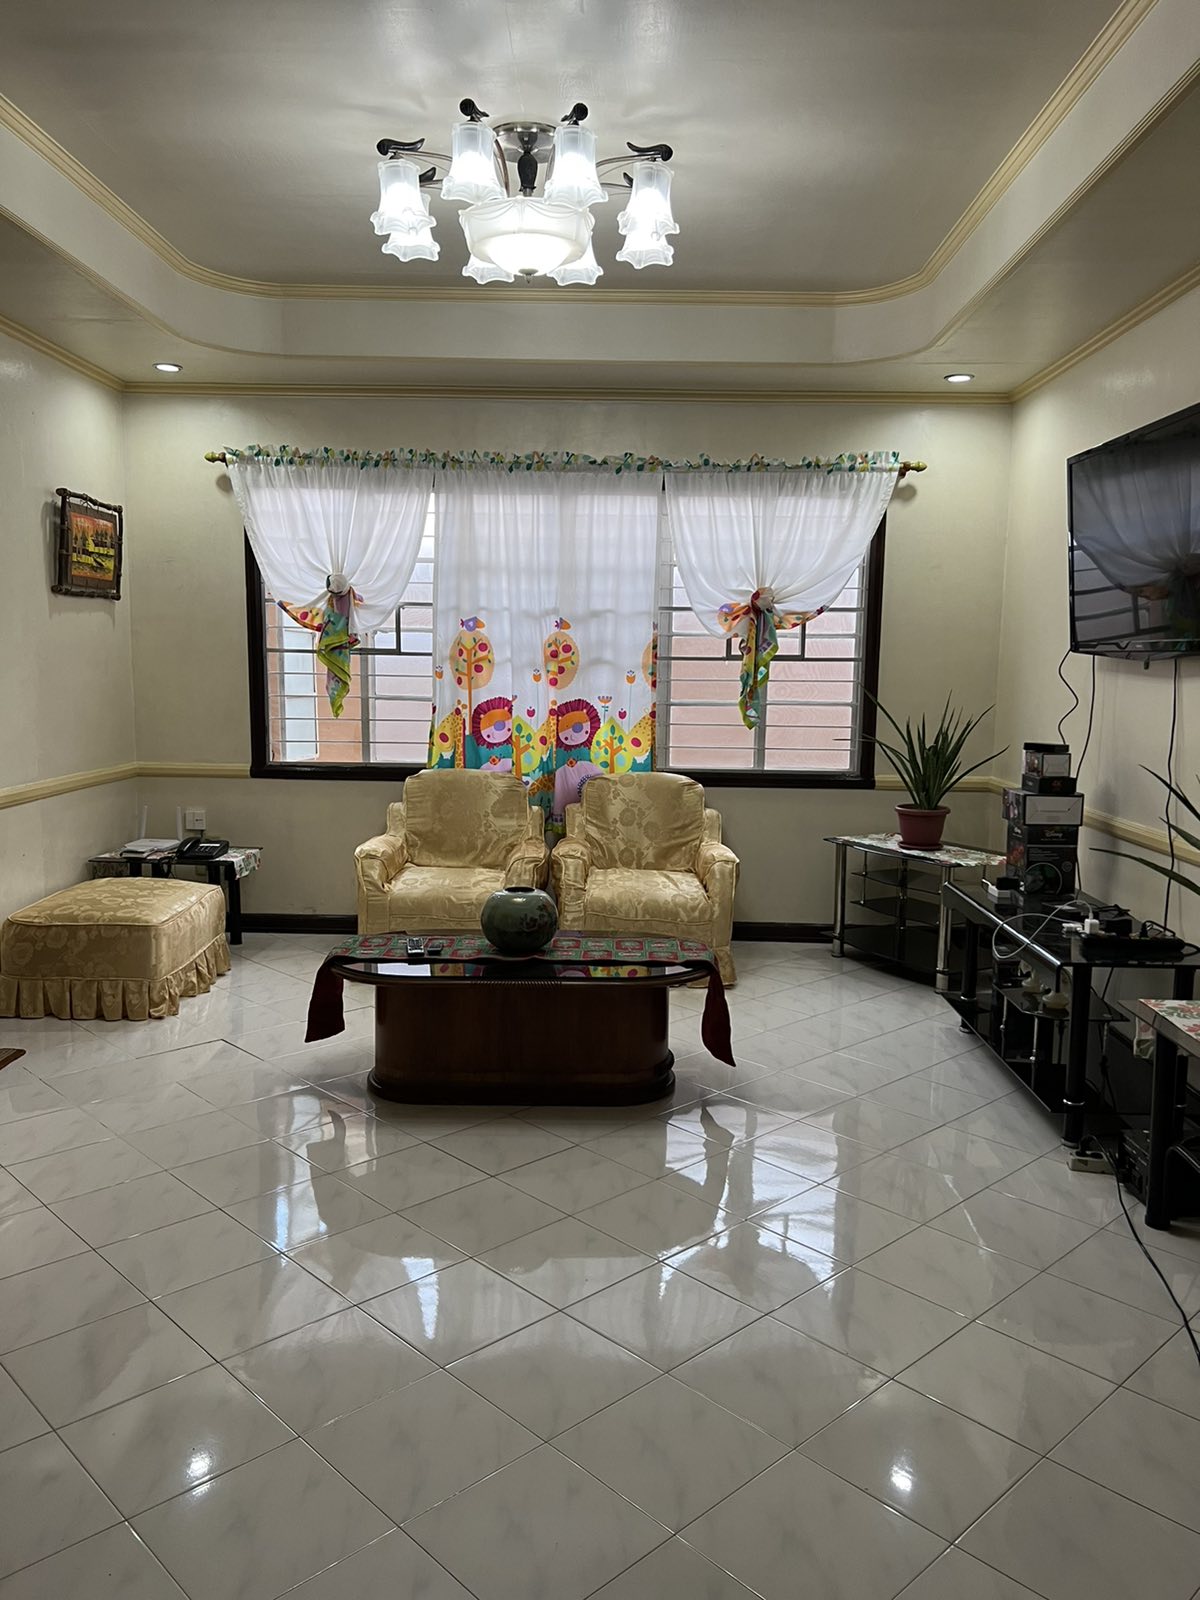 FOR SALE: 3Bedroom HOUSE AND LOT in Josephine Village Cavite